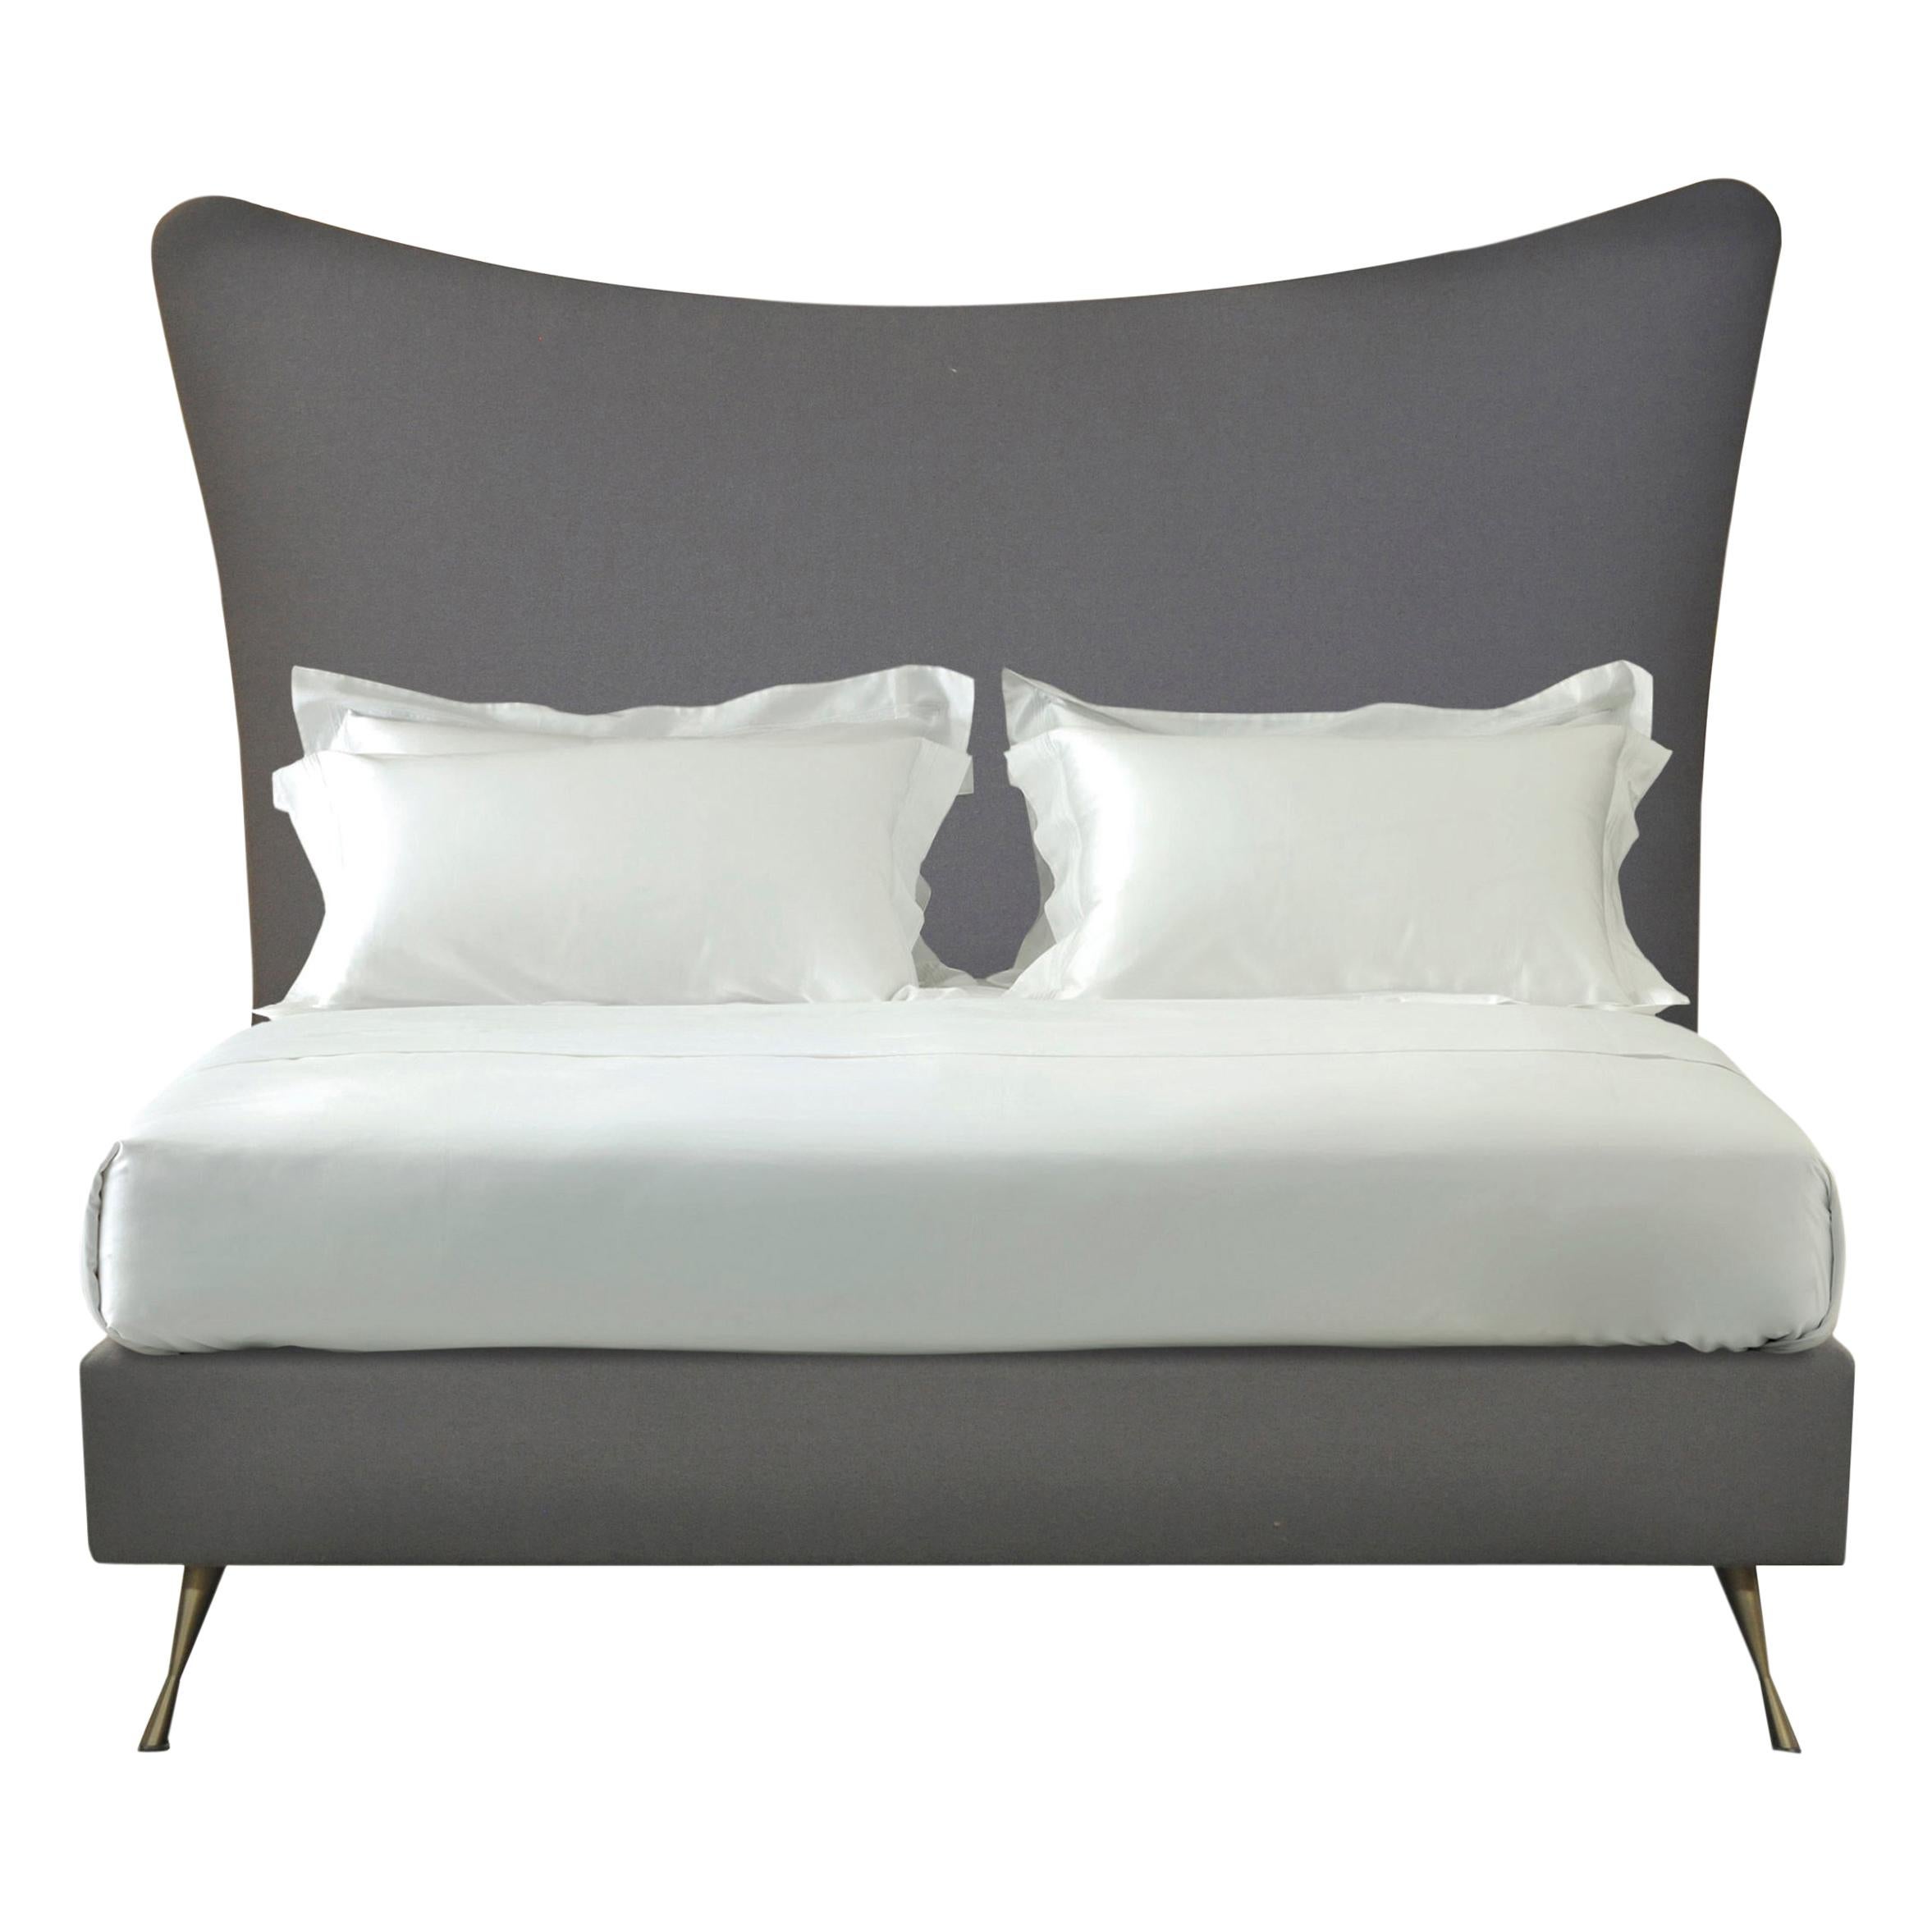 Savoir Amelia Headboard & Nº4 Bed Set, Made to Order, California King Size For Sale